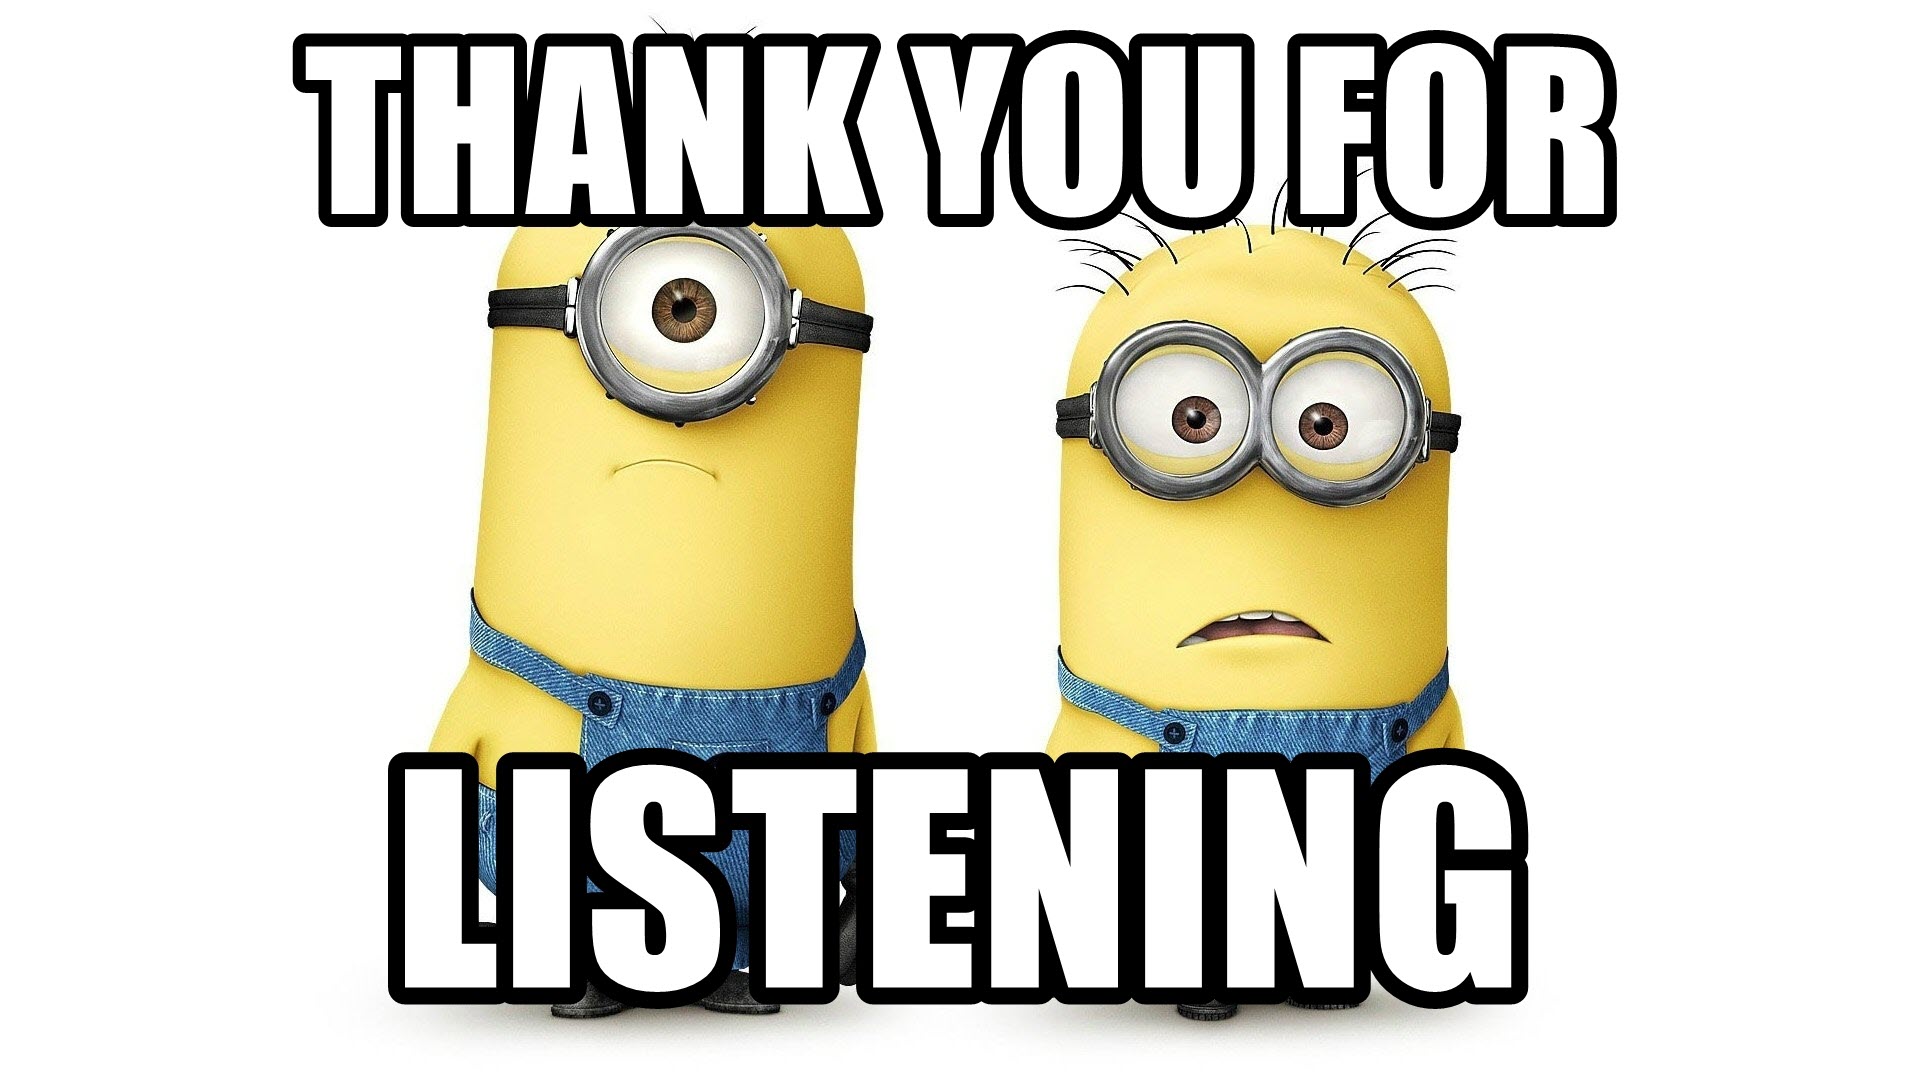 Ảnh thank you for listening cho tới PowerPoint